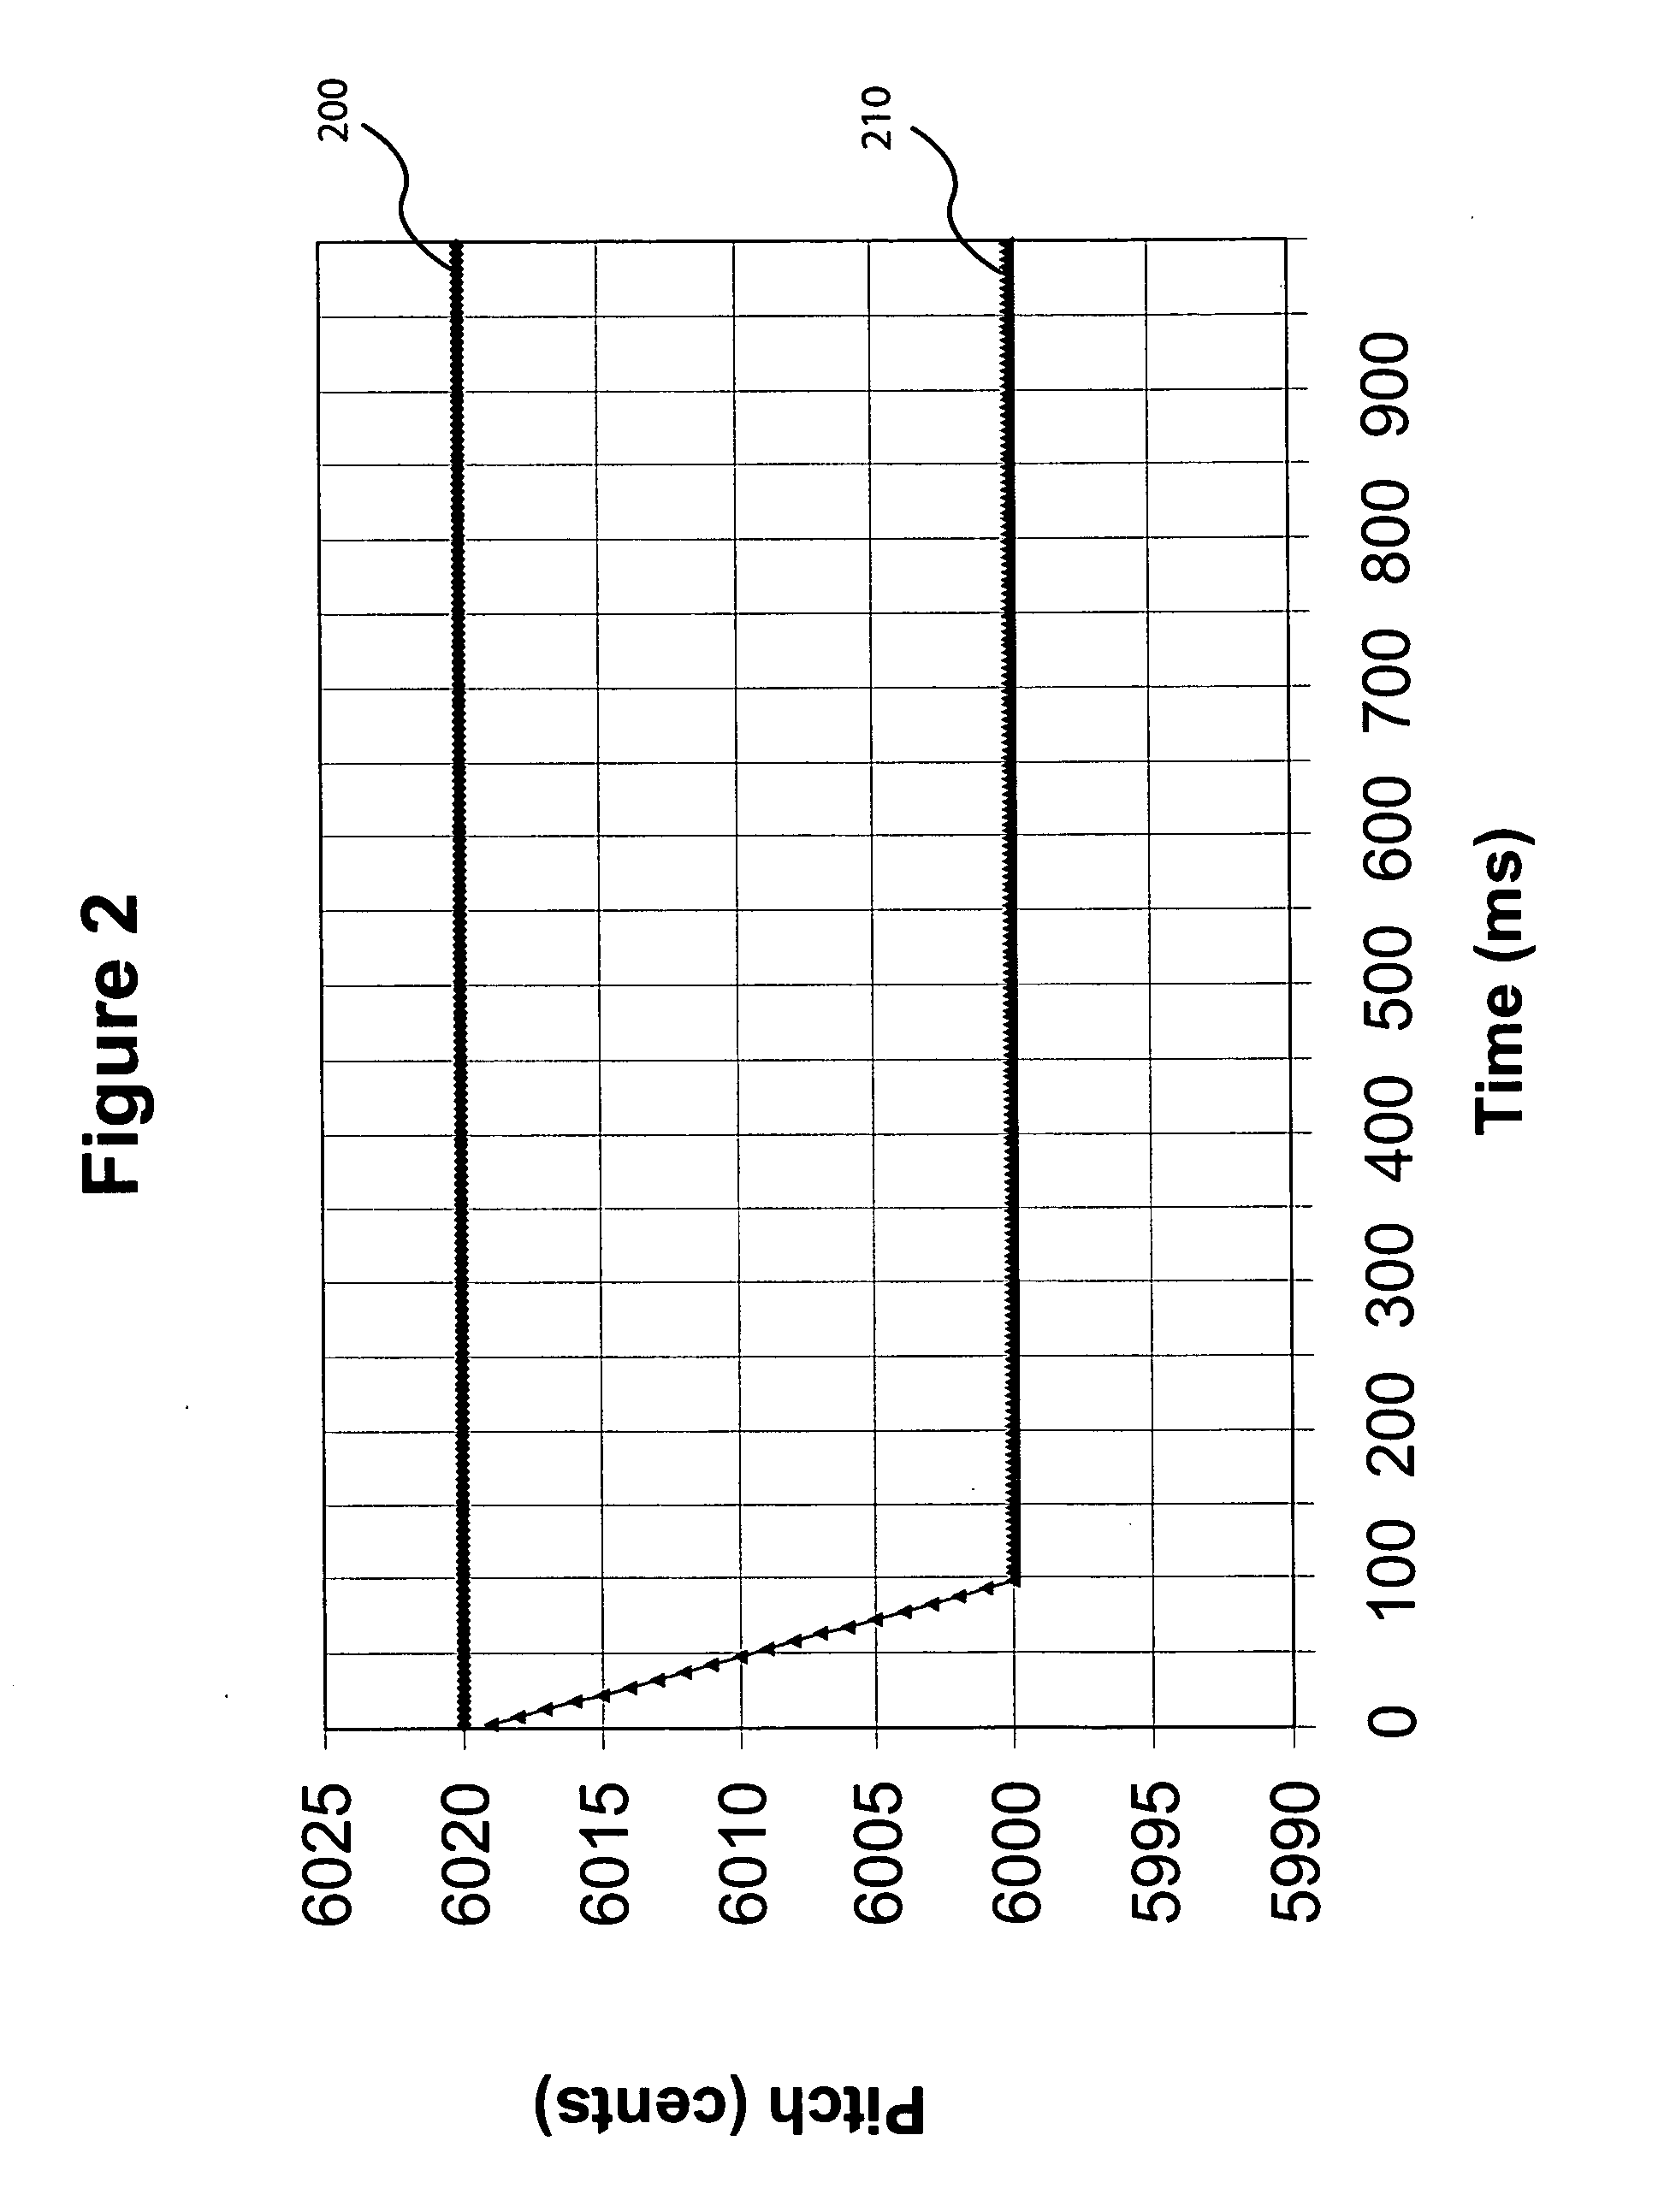 Position correction for an electronic musical instrument